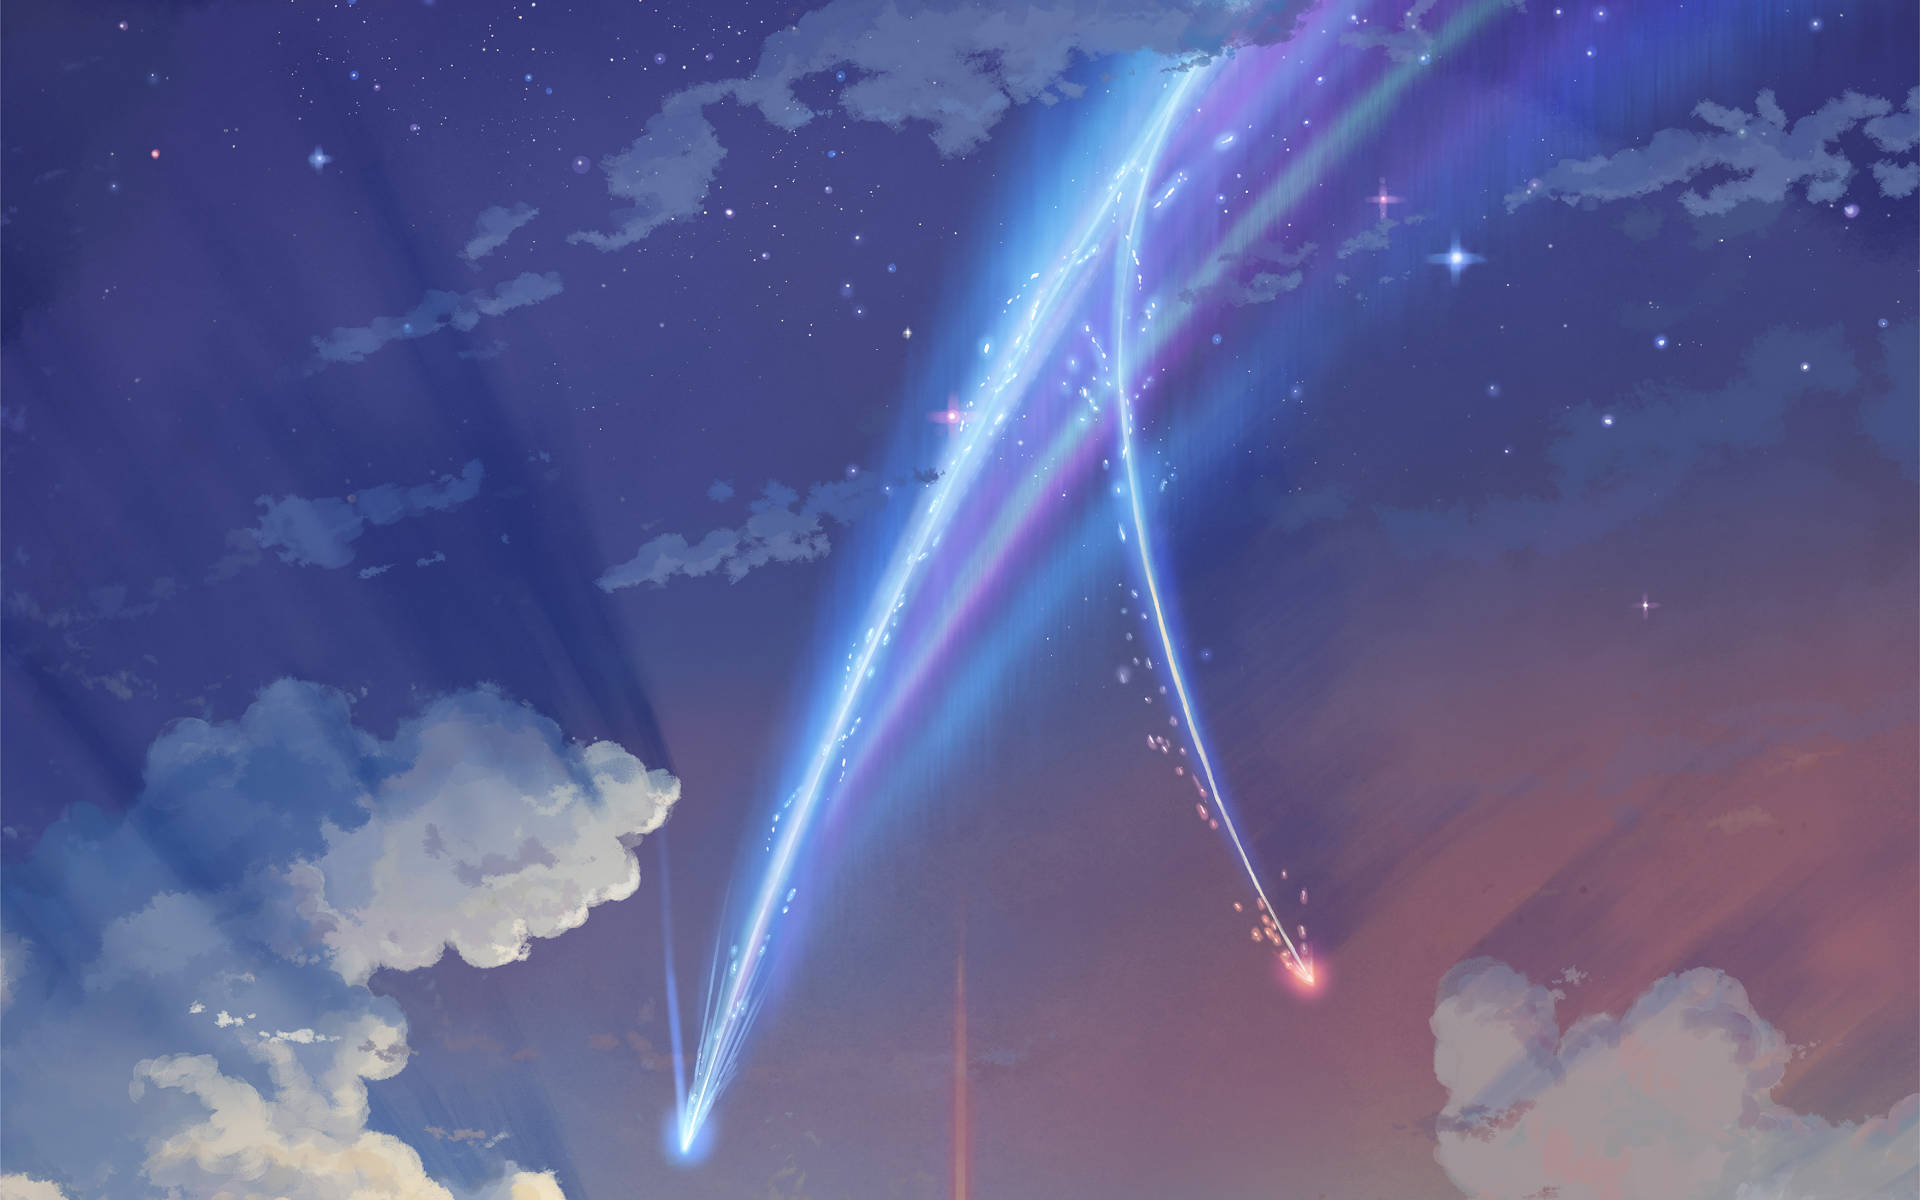 Popular Your Name Anime Film Background